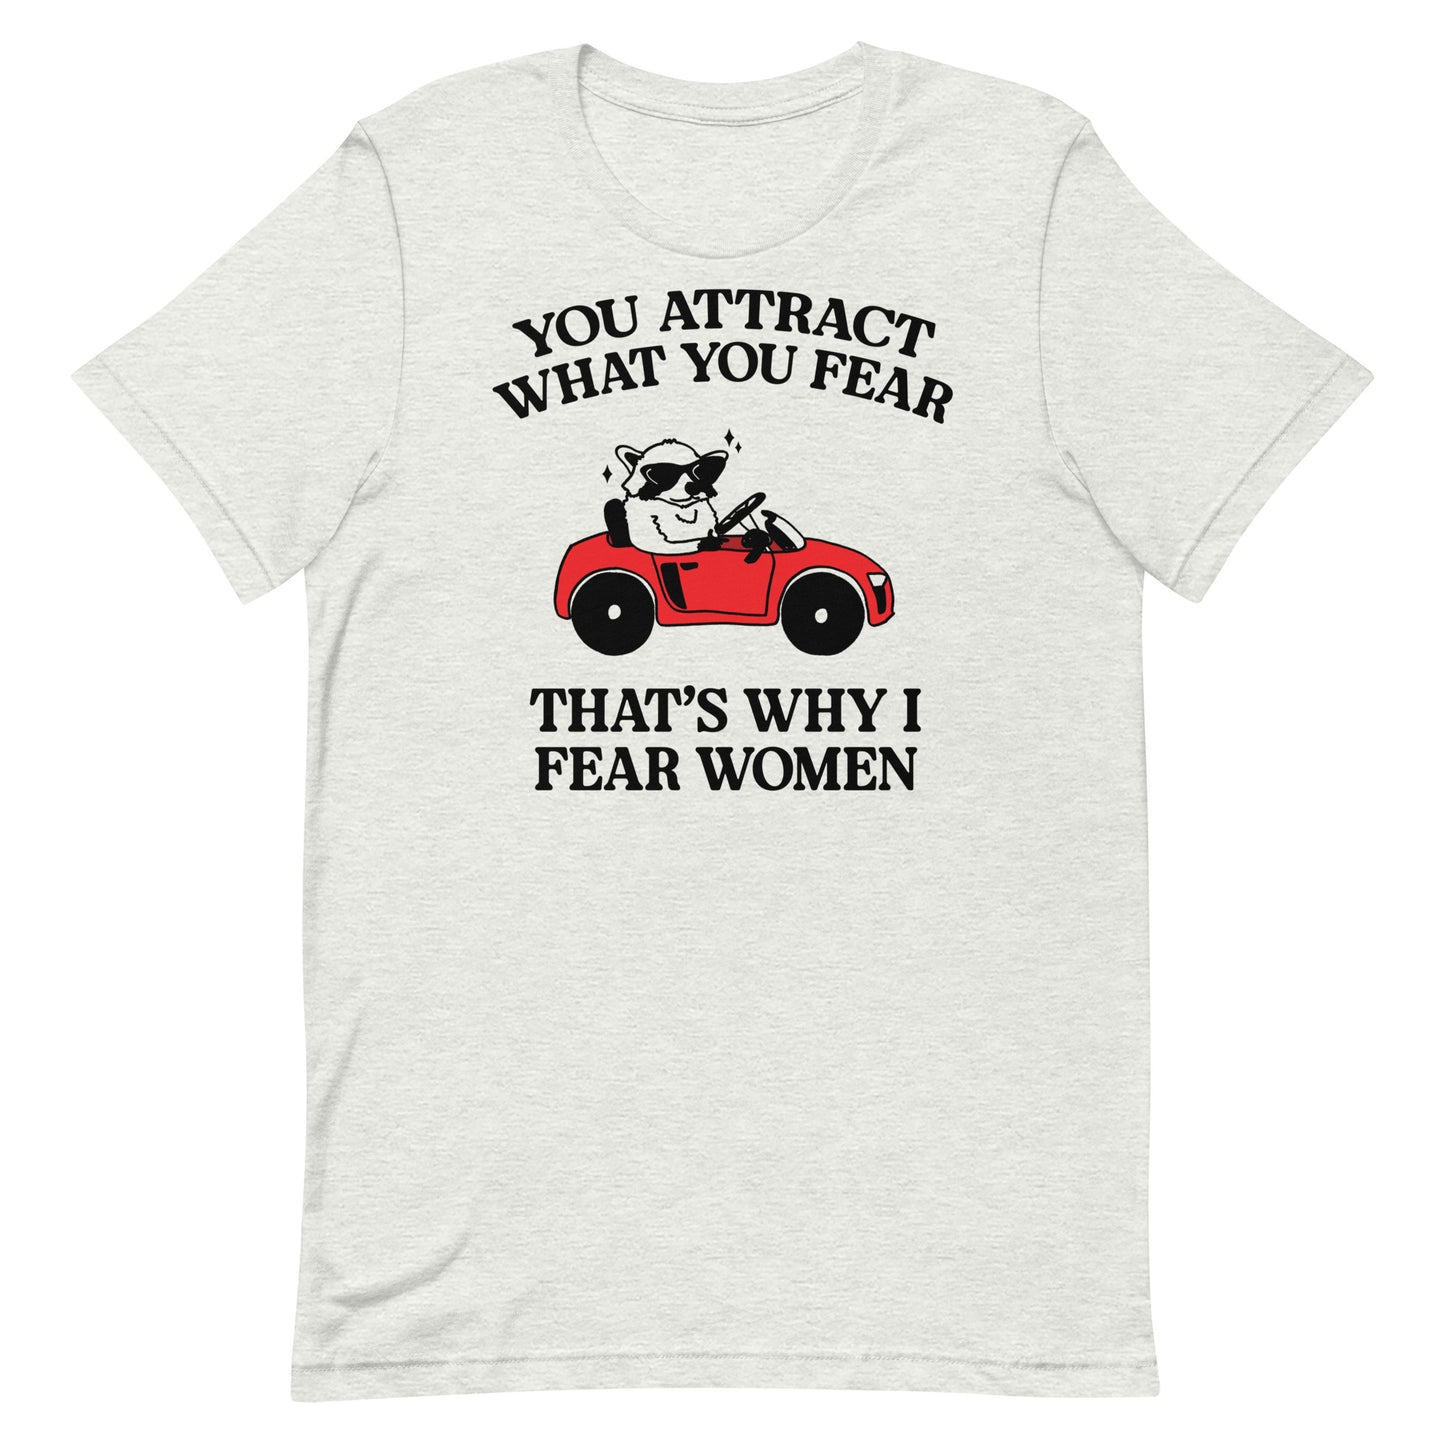 That's Why I Fear Women Unisex t-shirt